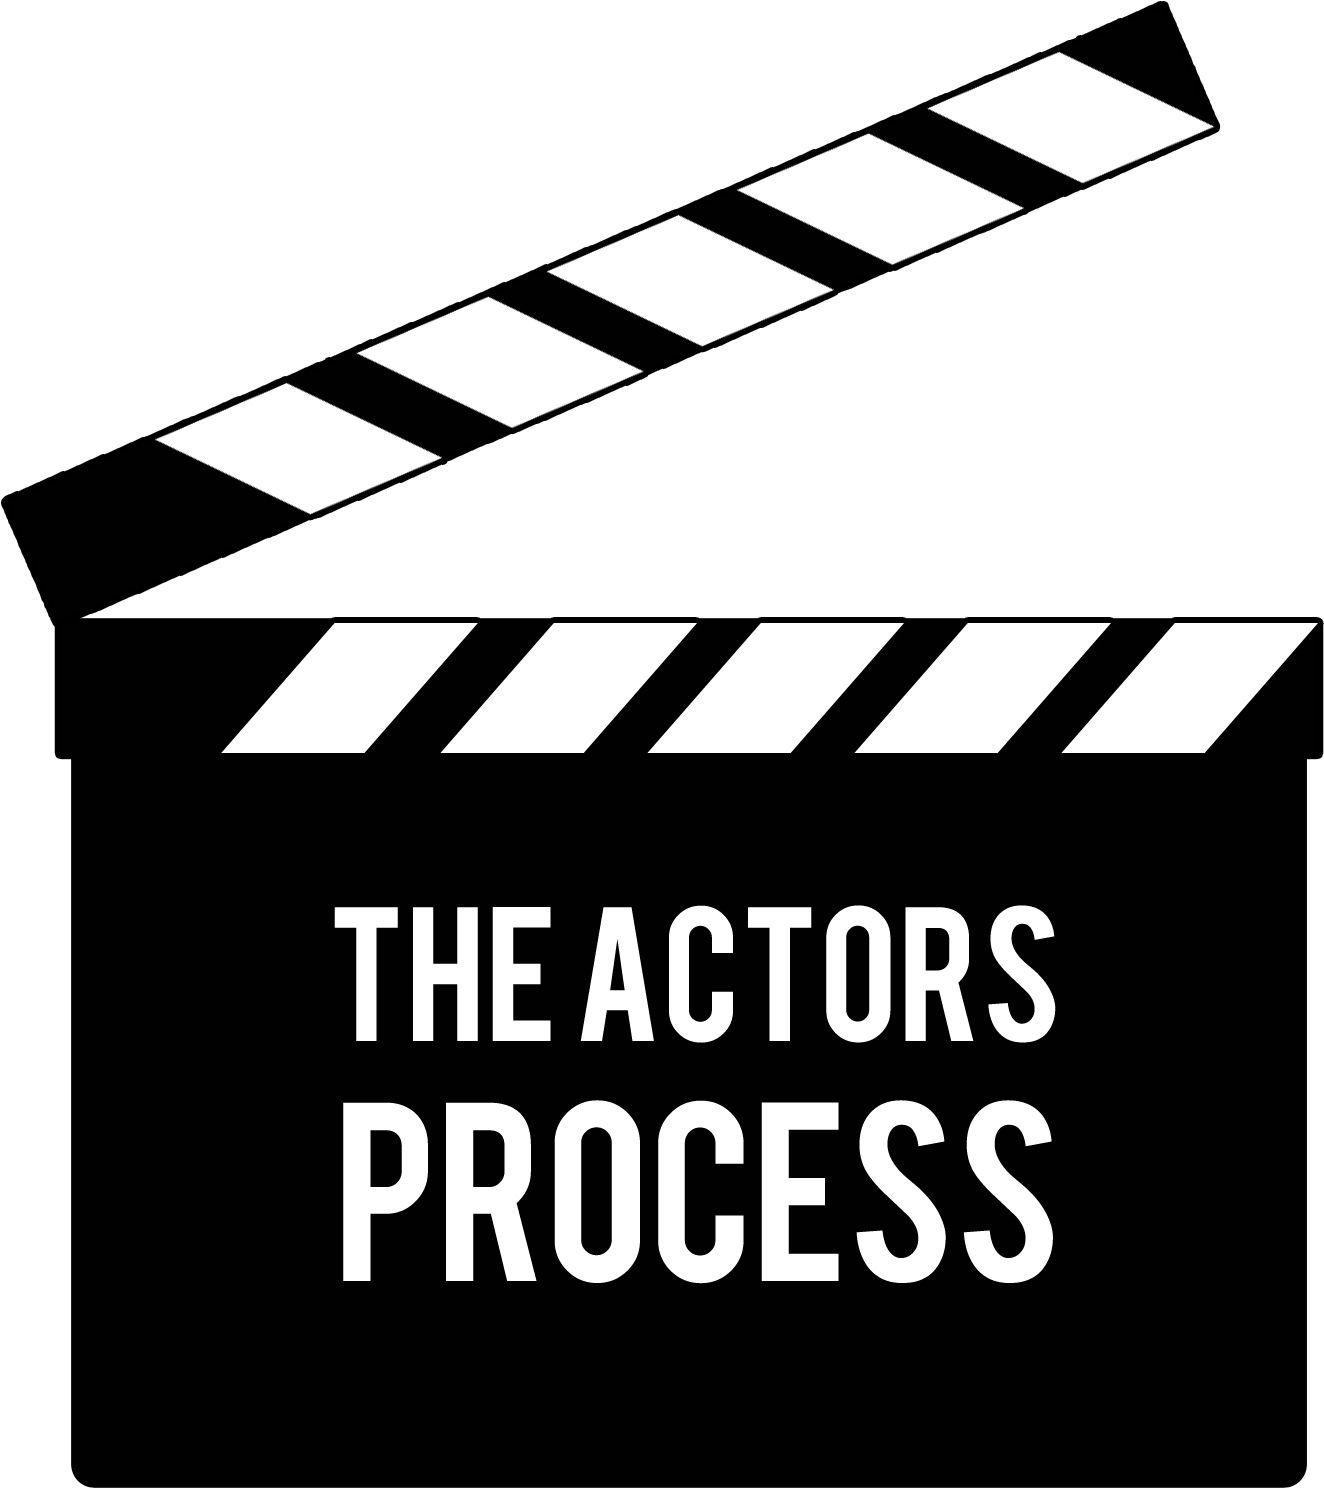 Actors Logo - Press and Acting News. Anthony Meindl's Actor Workshop